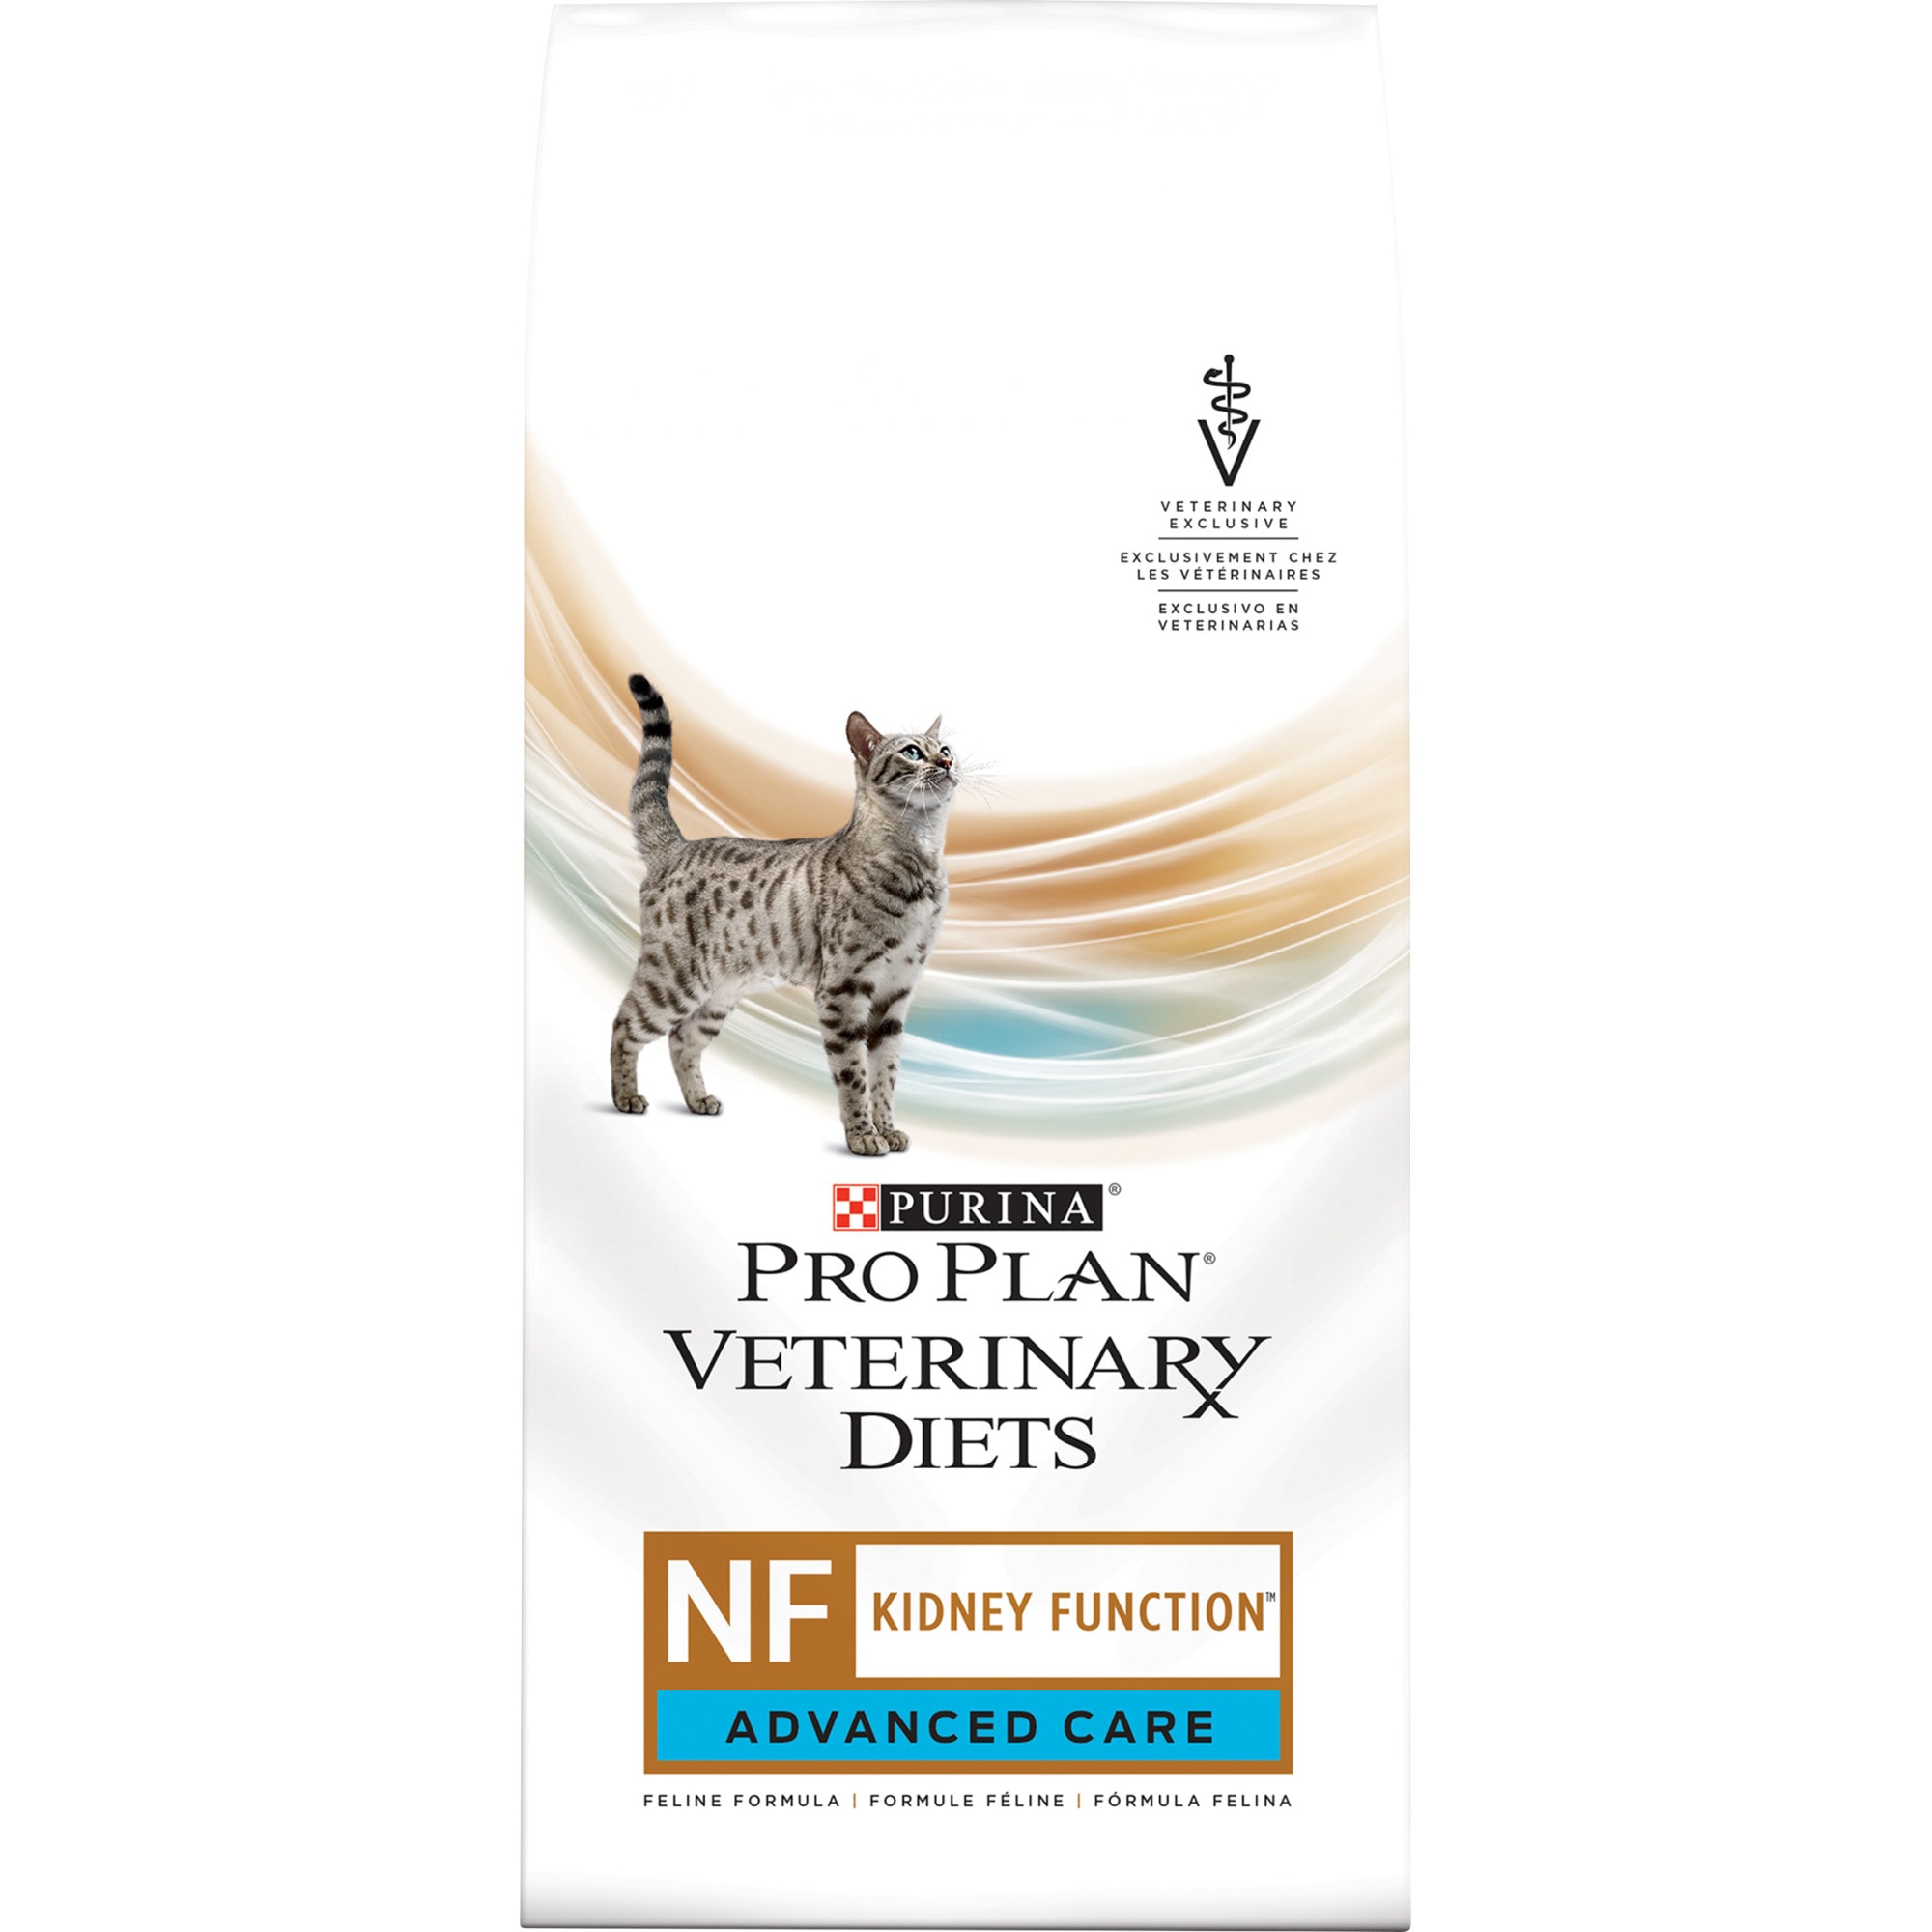 Purina Pro Plan Veterinary Diets NF Kidney Function Advanced Care